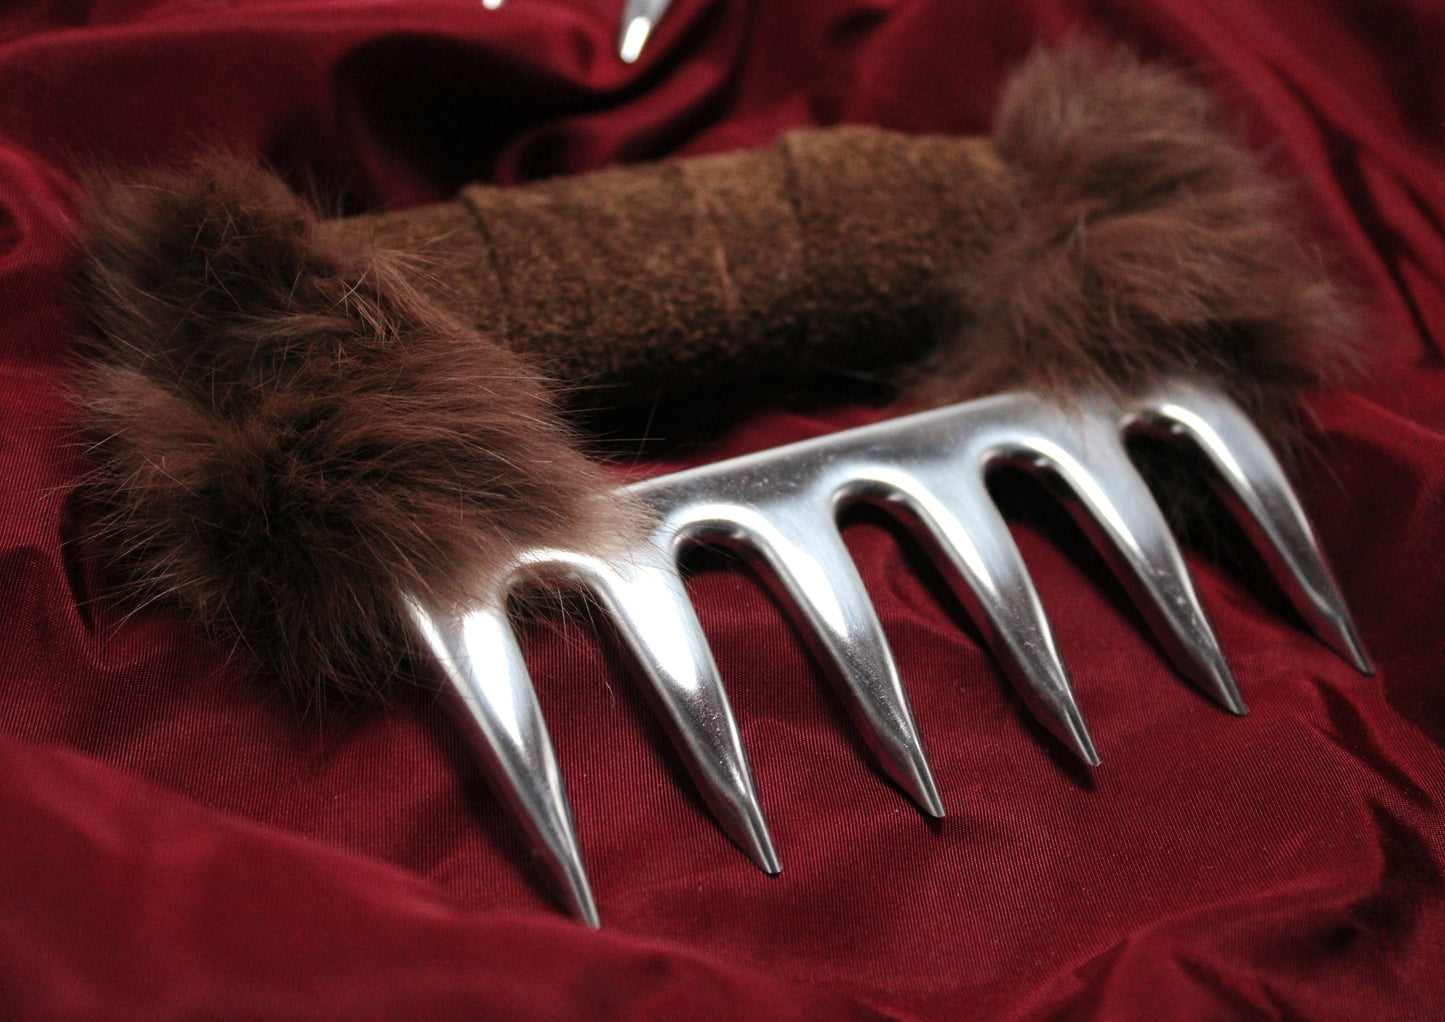 Primal claws, brown bear paws